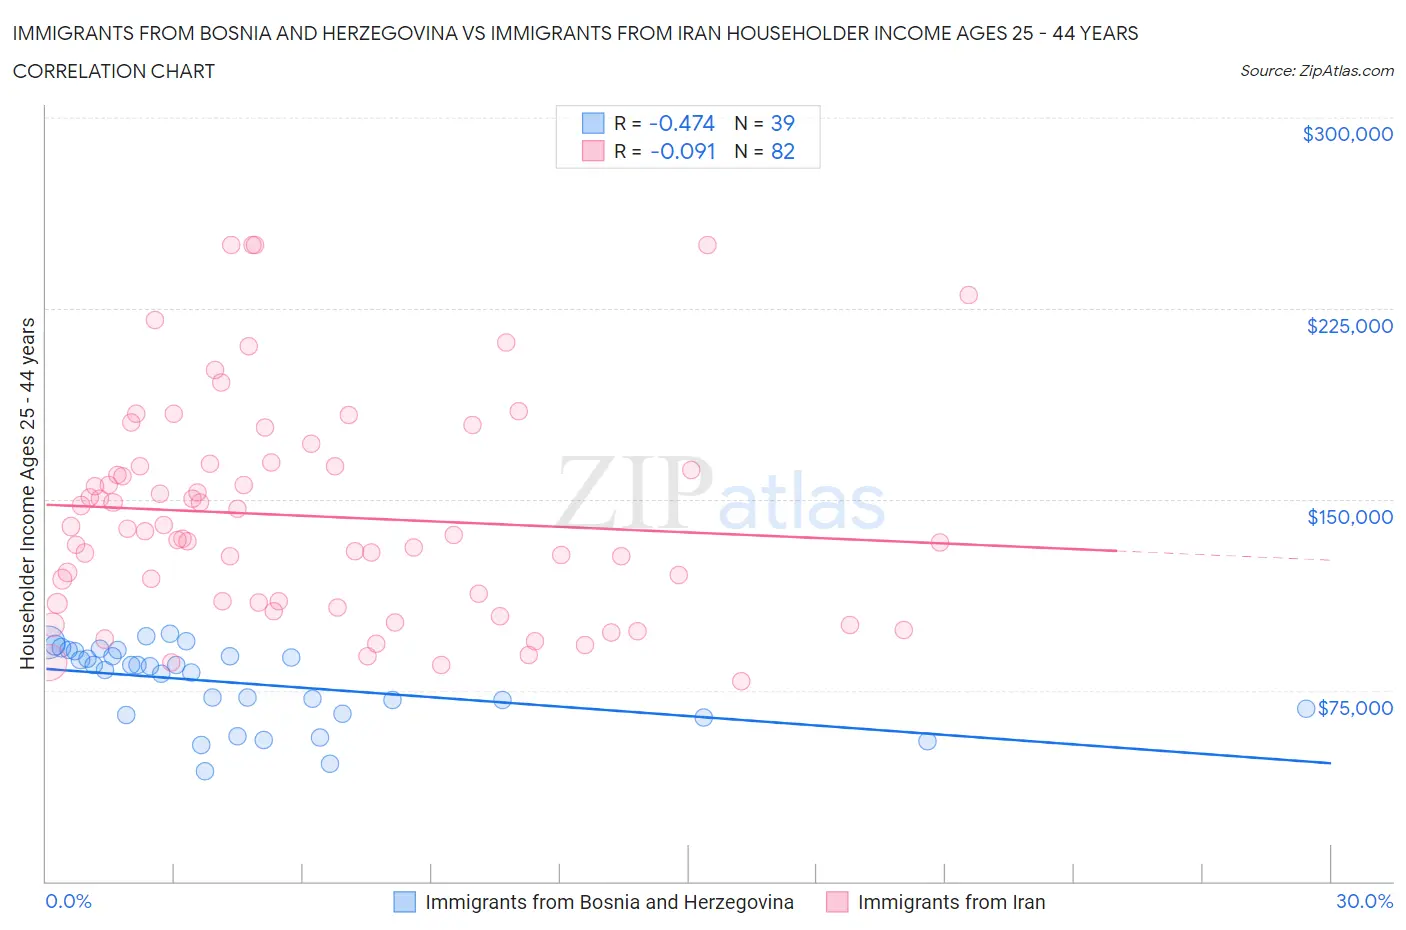 Immigrants from Bosnia and Herzegovina vs Immigrants from Iran Householder Income Ages 25 - 44 years